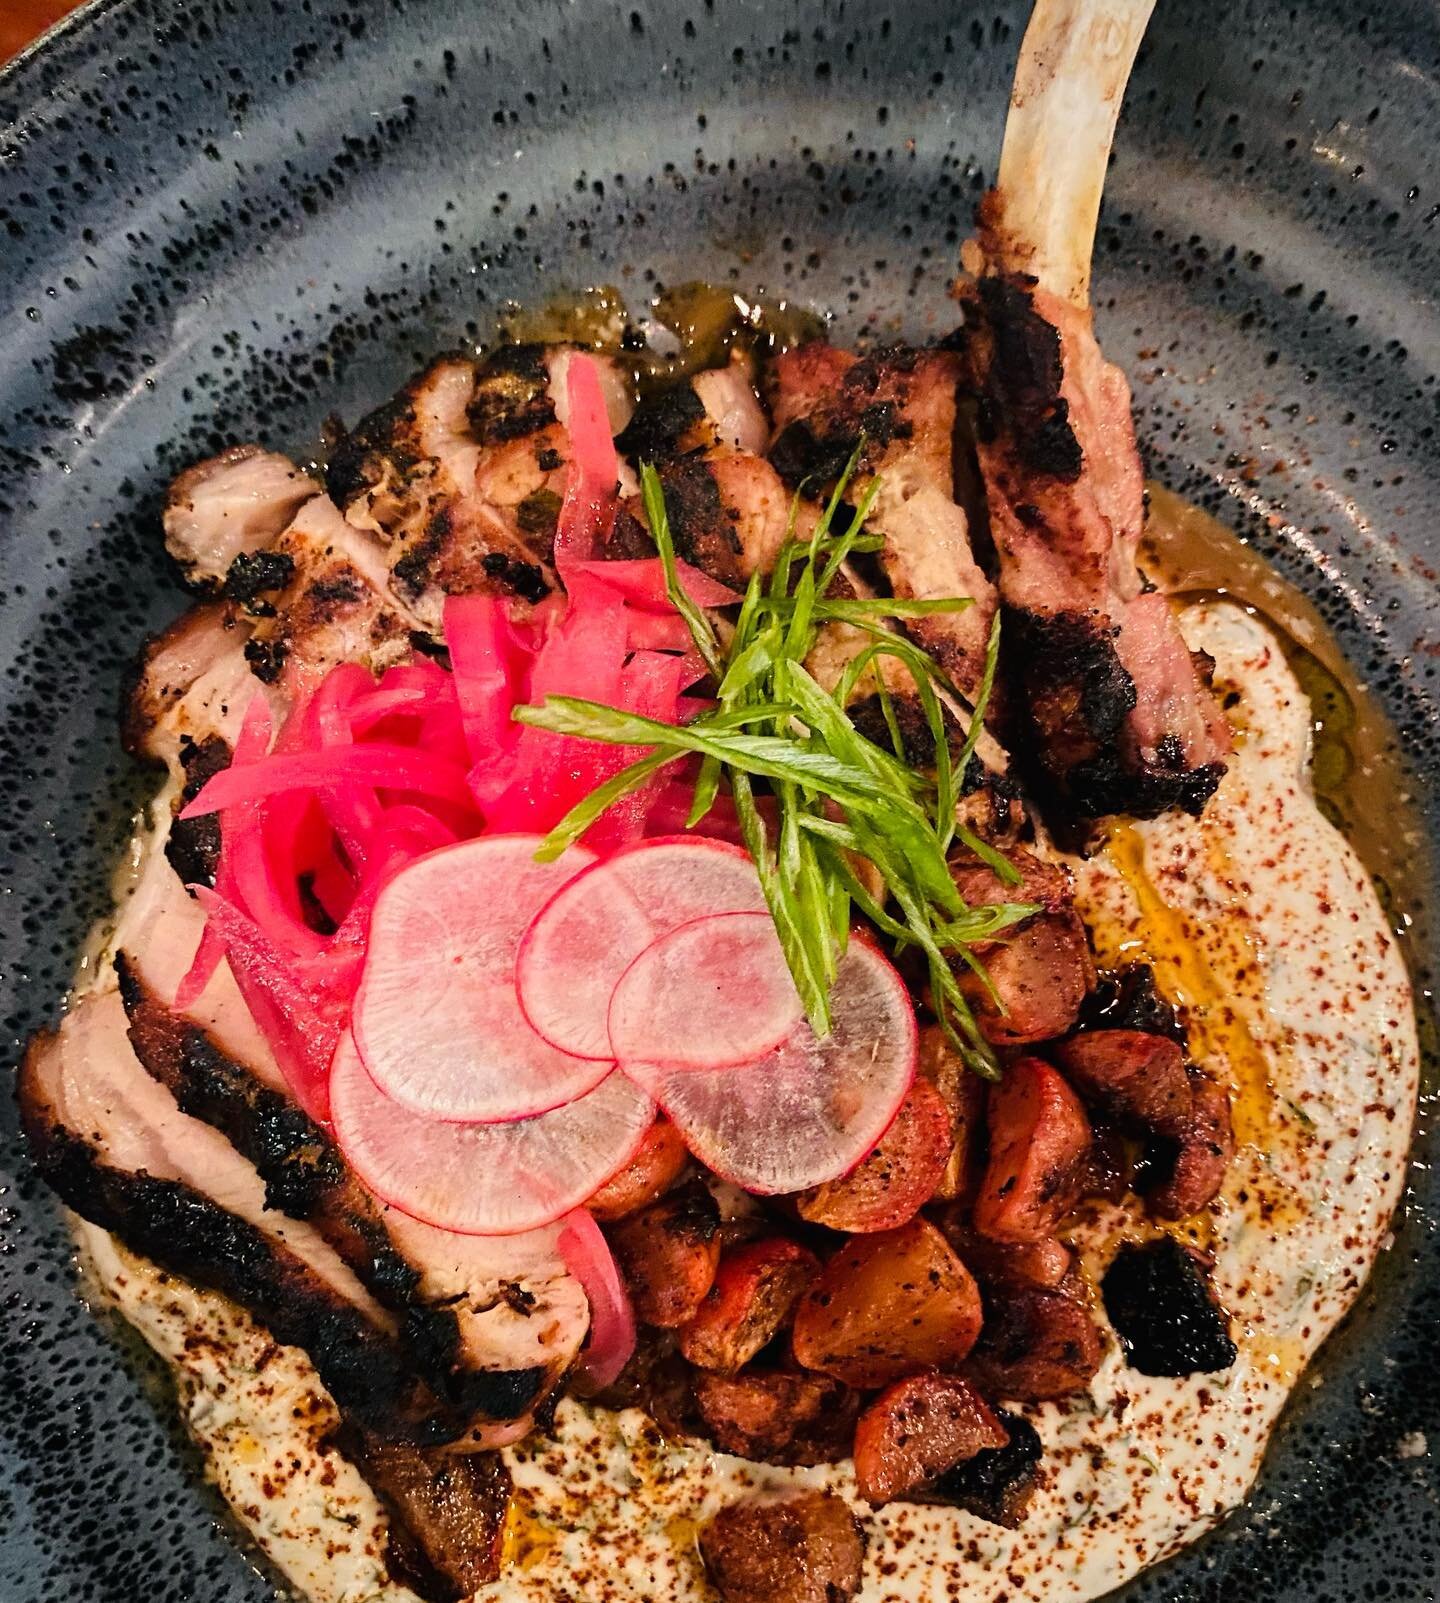 We&rsquo;ve got a beautiful bone in pork chop feature for you this weekend. Chimichurri marinated BC bone in pork chop grilled to perfection and served with roast radishes and a decadent cream kale sauce. This is a warm hug of a dish for this rainy w